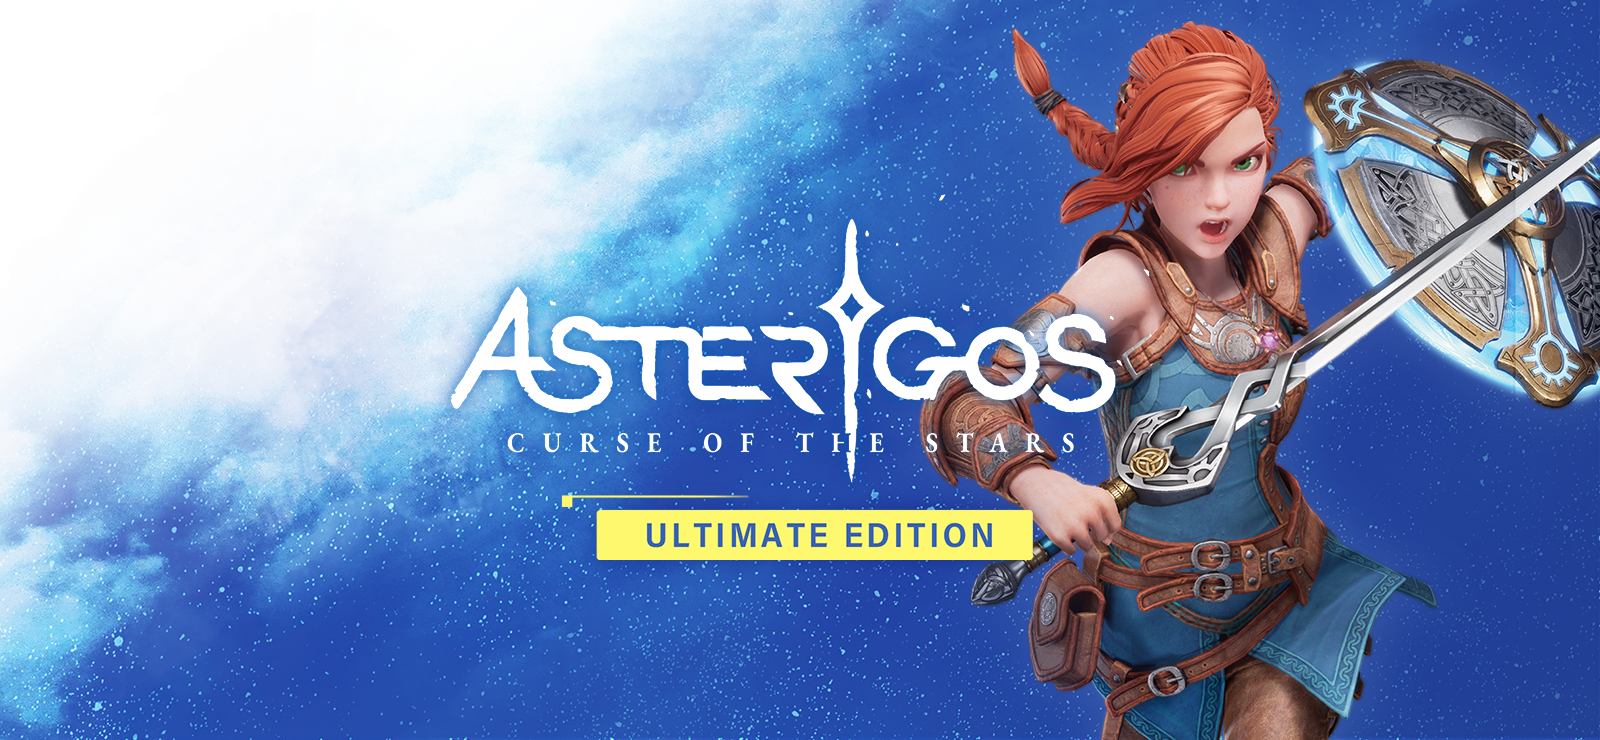 Asterigos: Curse Of The Stars - Ultimate Edition